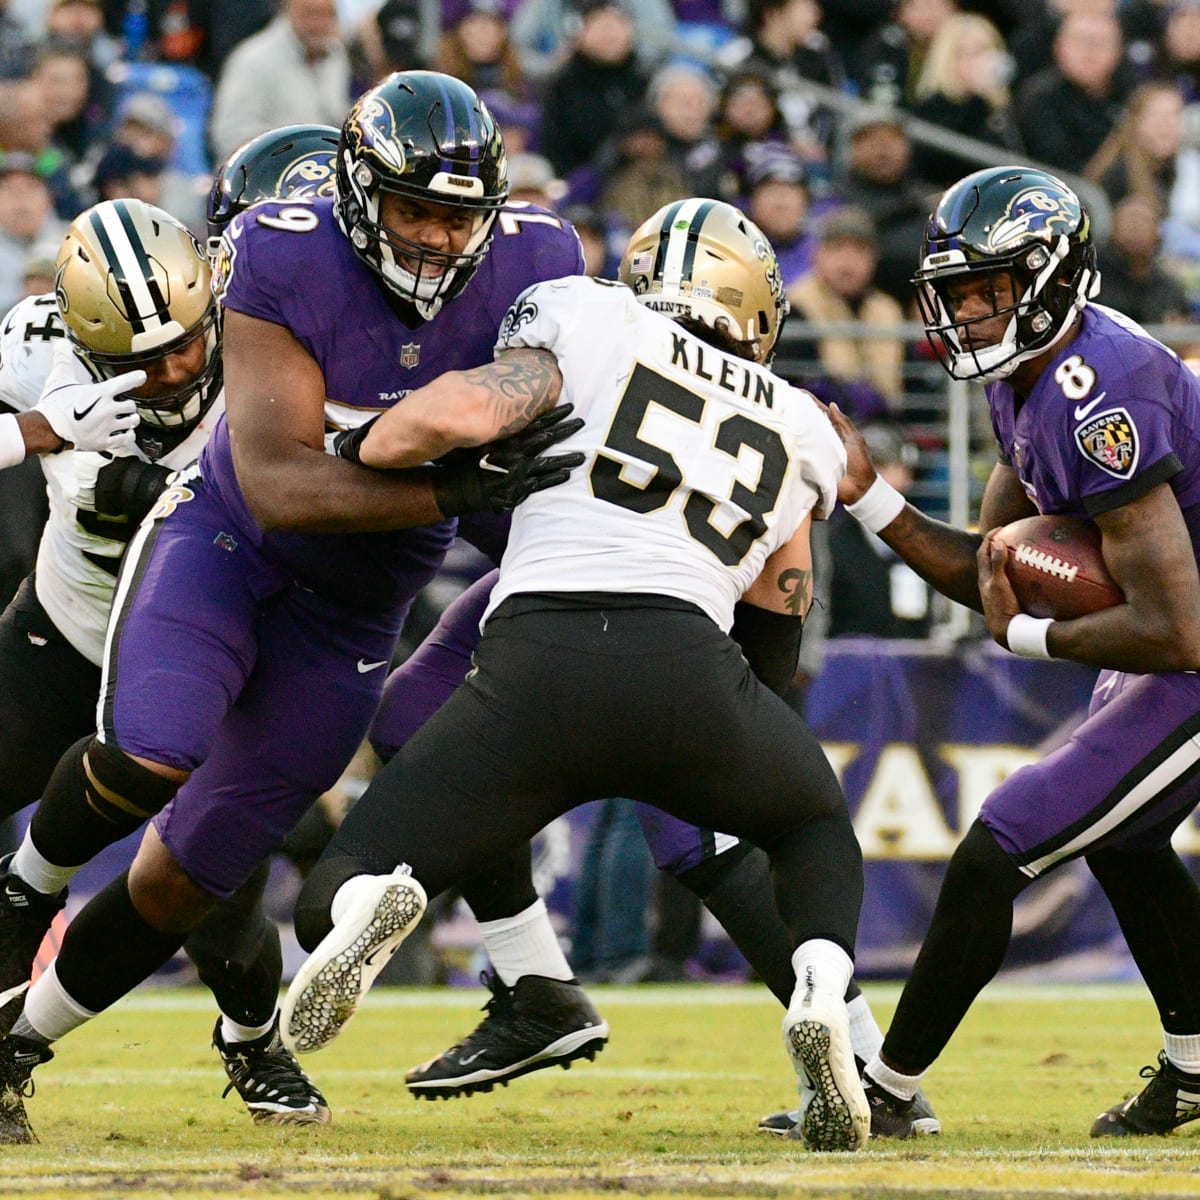 Ronnie Stanley Ranked Among Top 5 Offensive Tackles in NFL